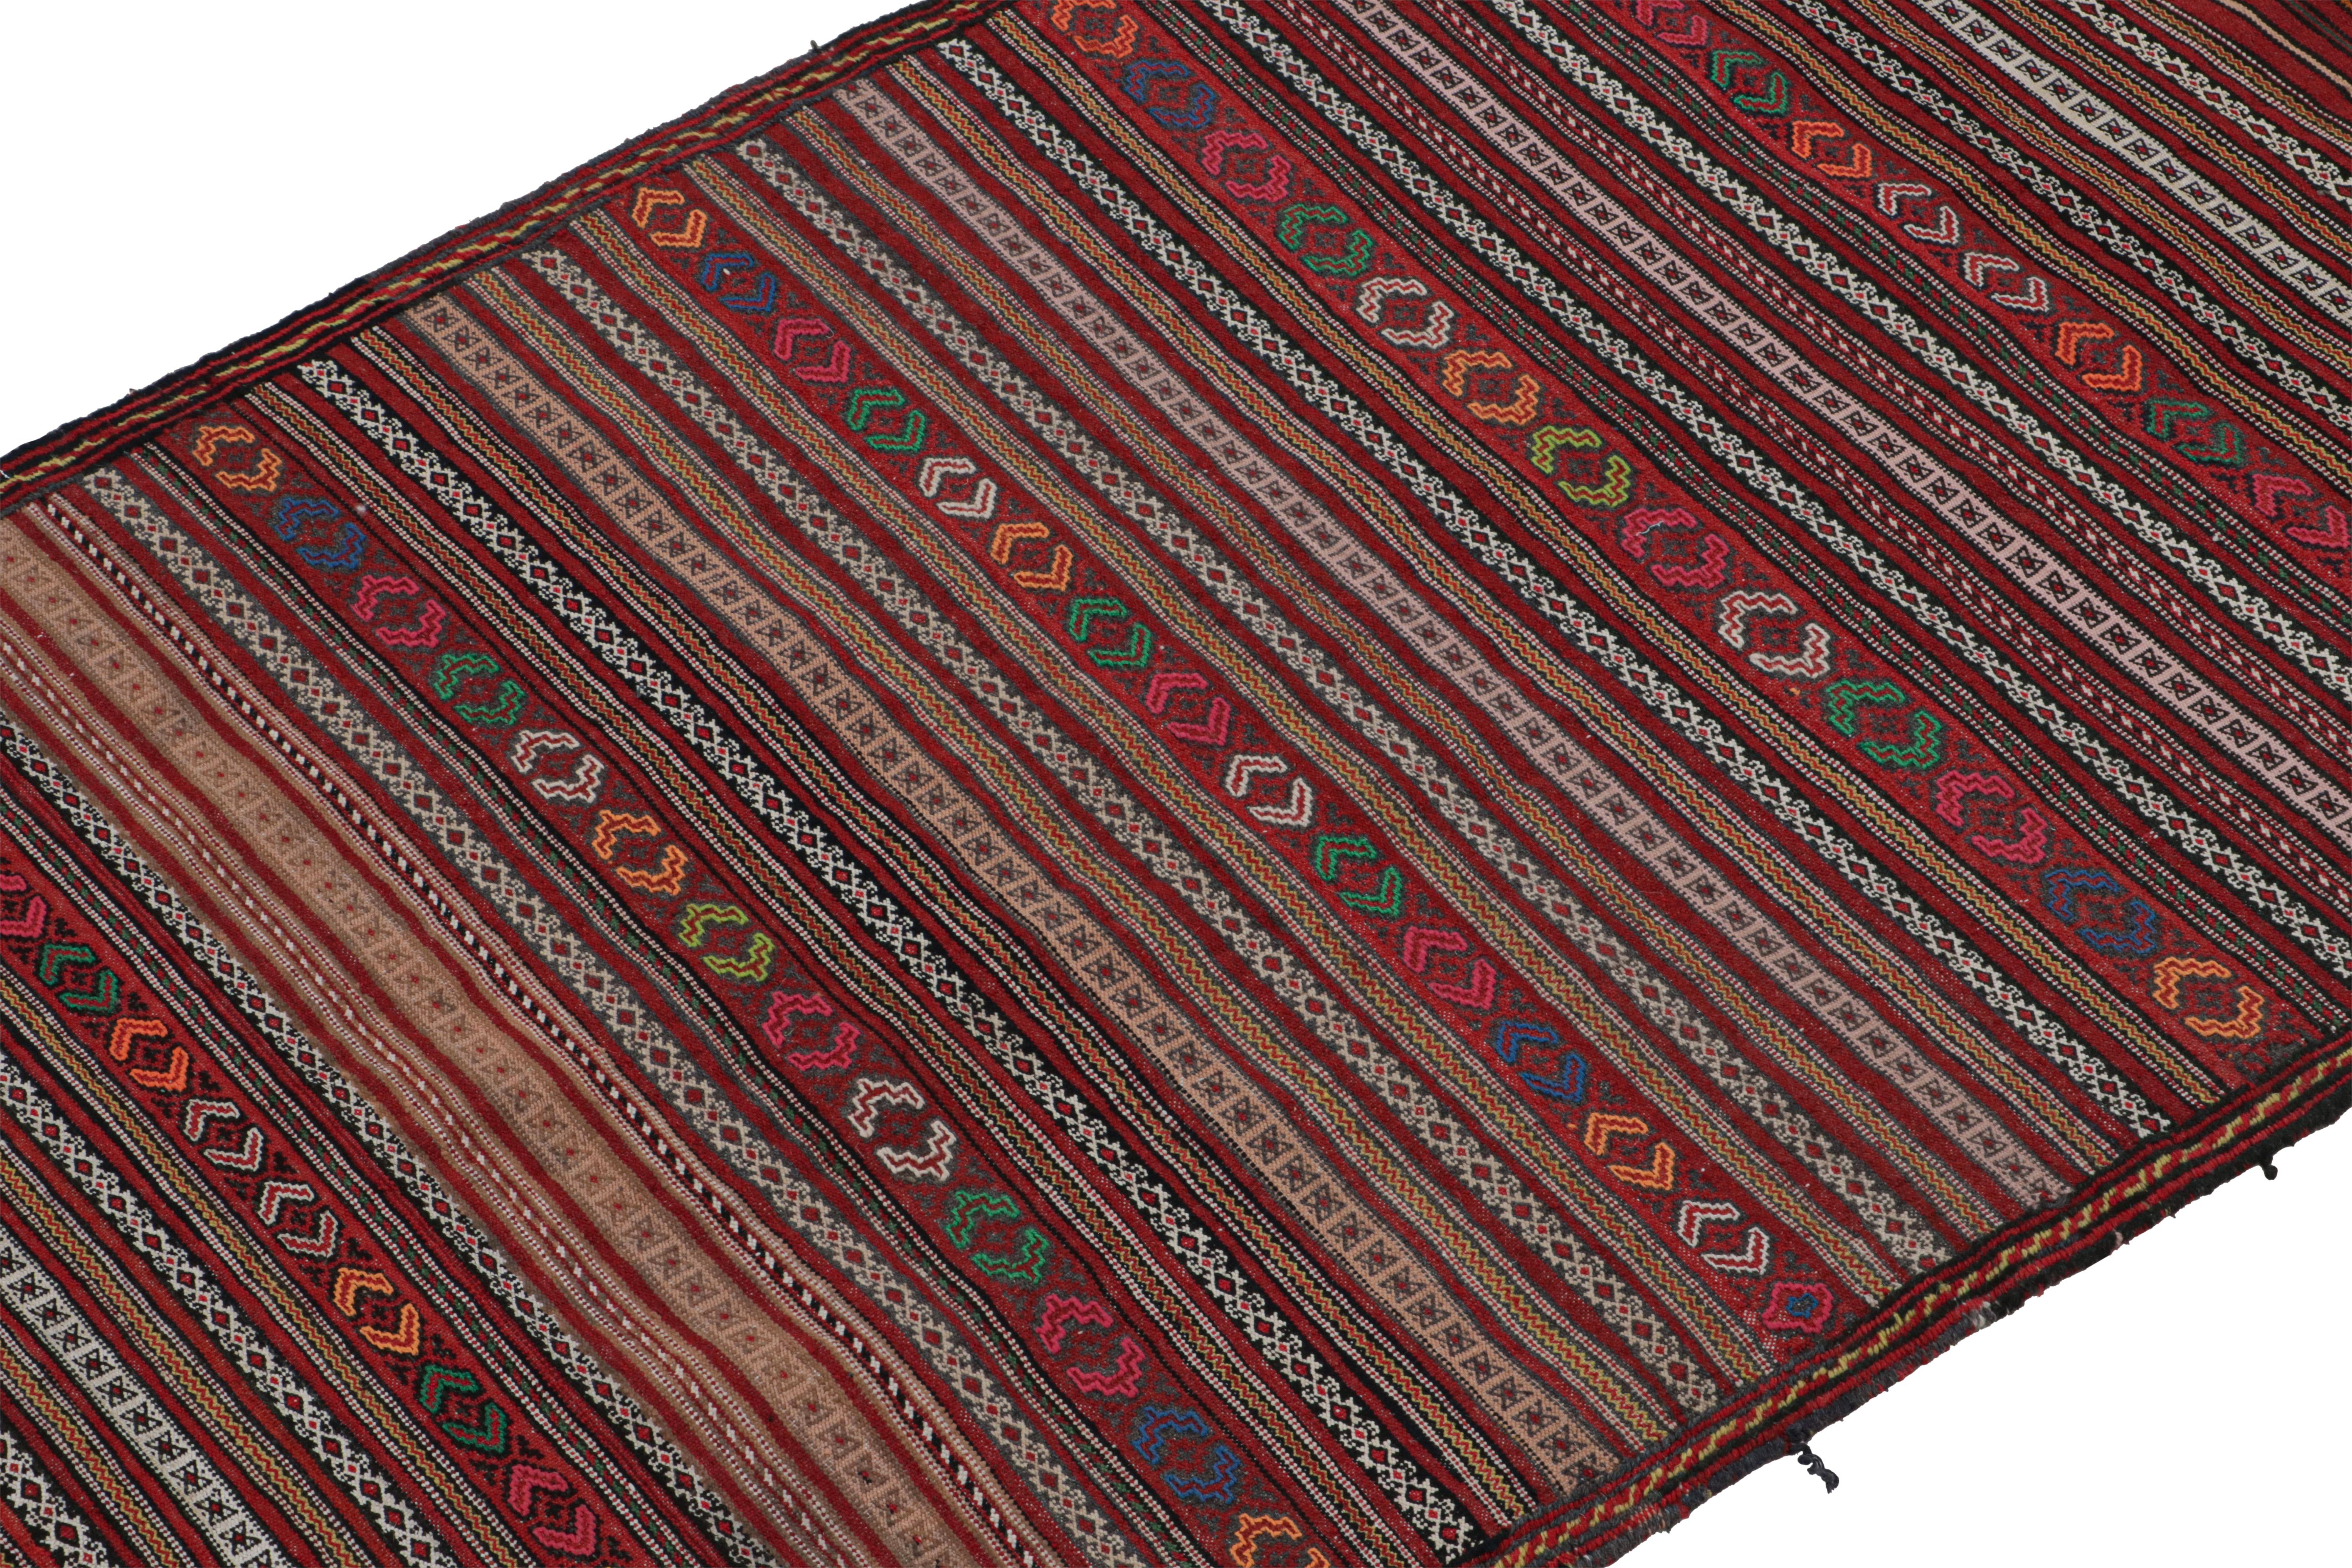 Hand-Woven Vintage Baluch Kilim Rug in Red with Stripes and Tribal Motifs, from Rug & Kilim For Sale